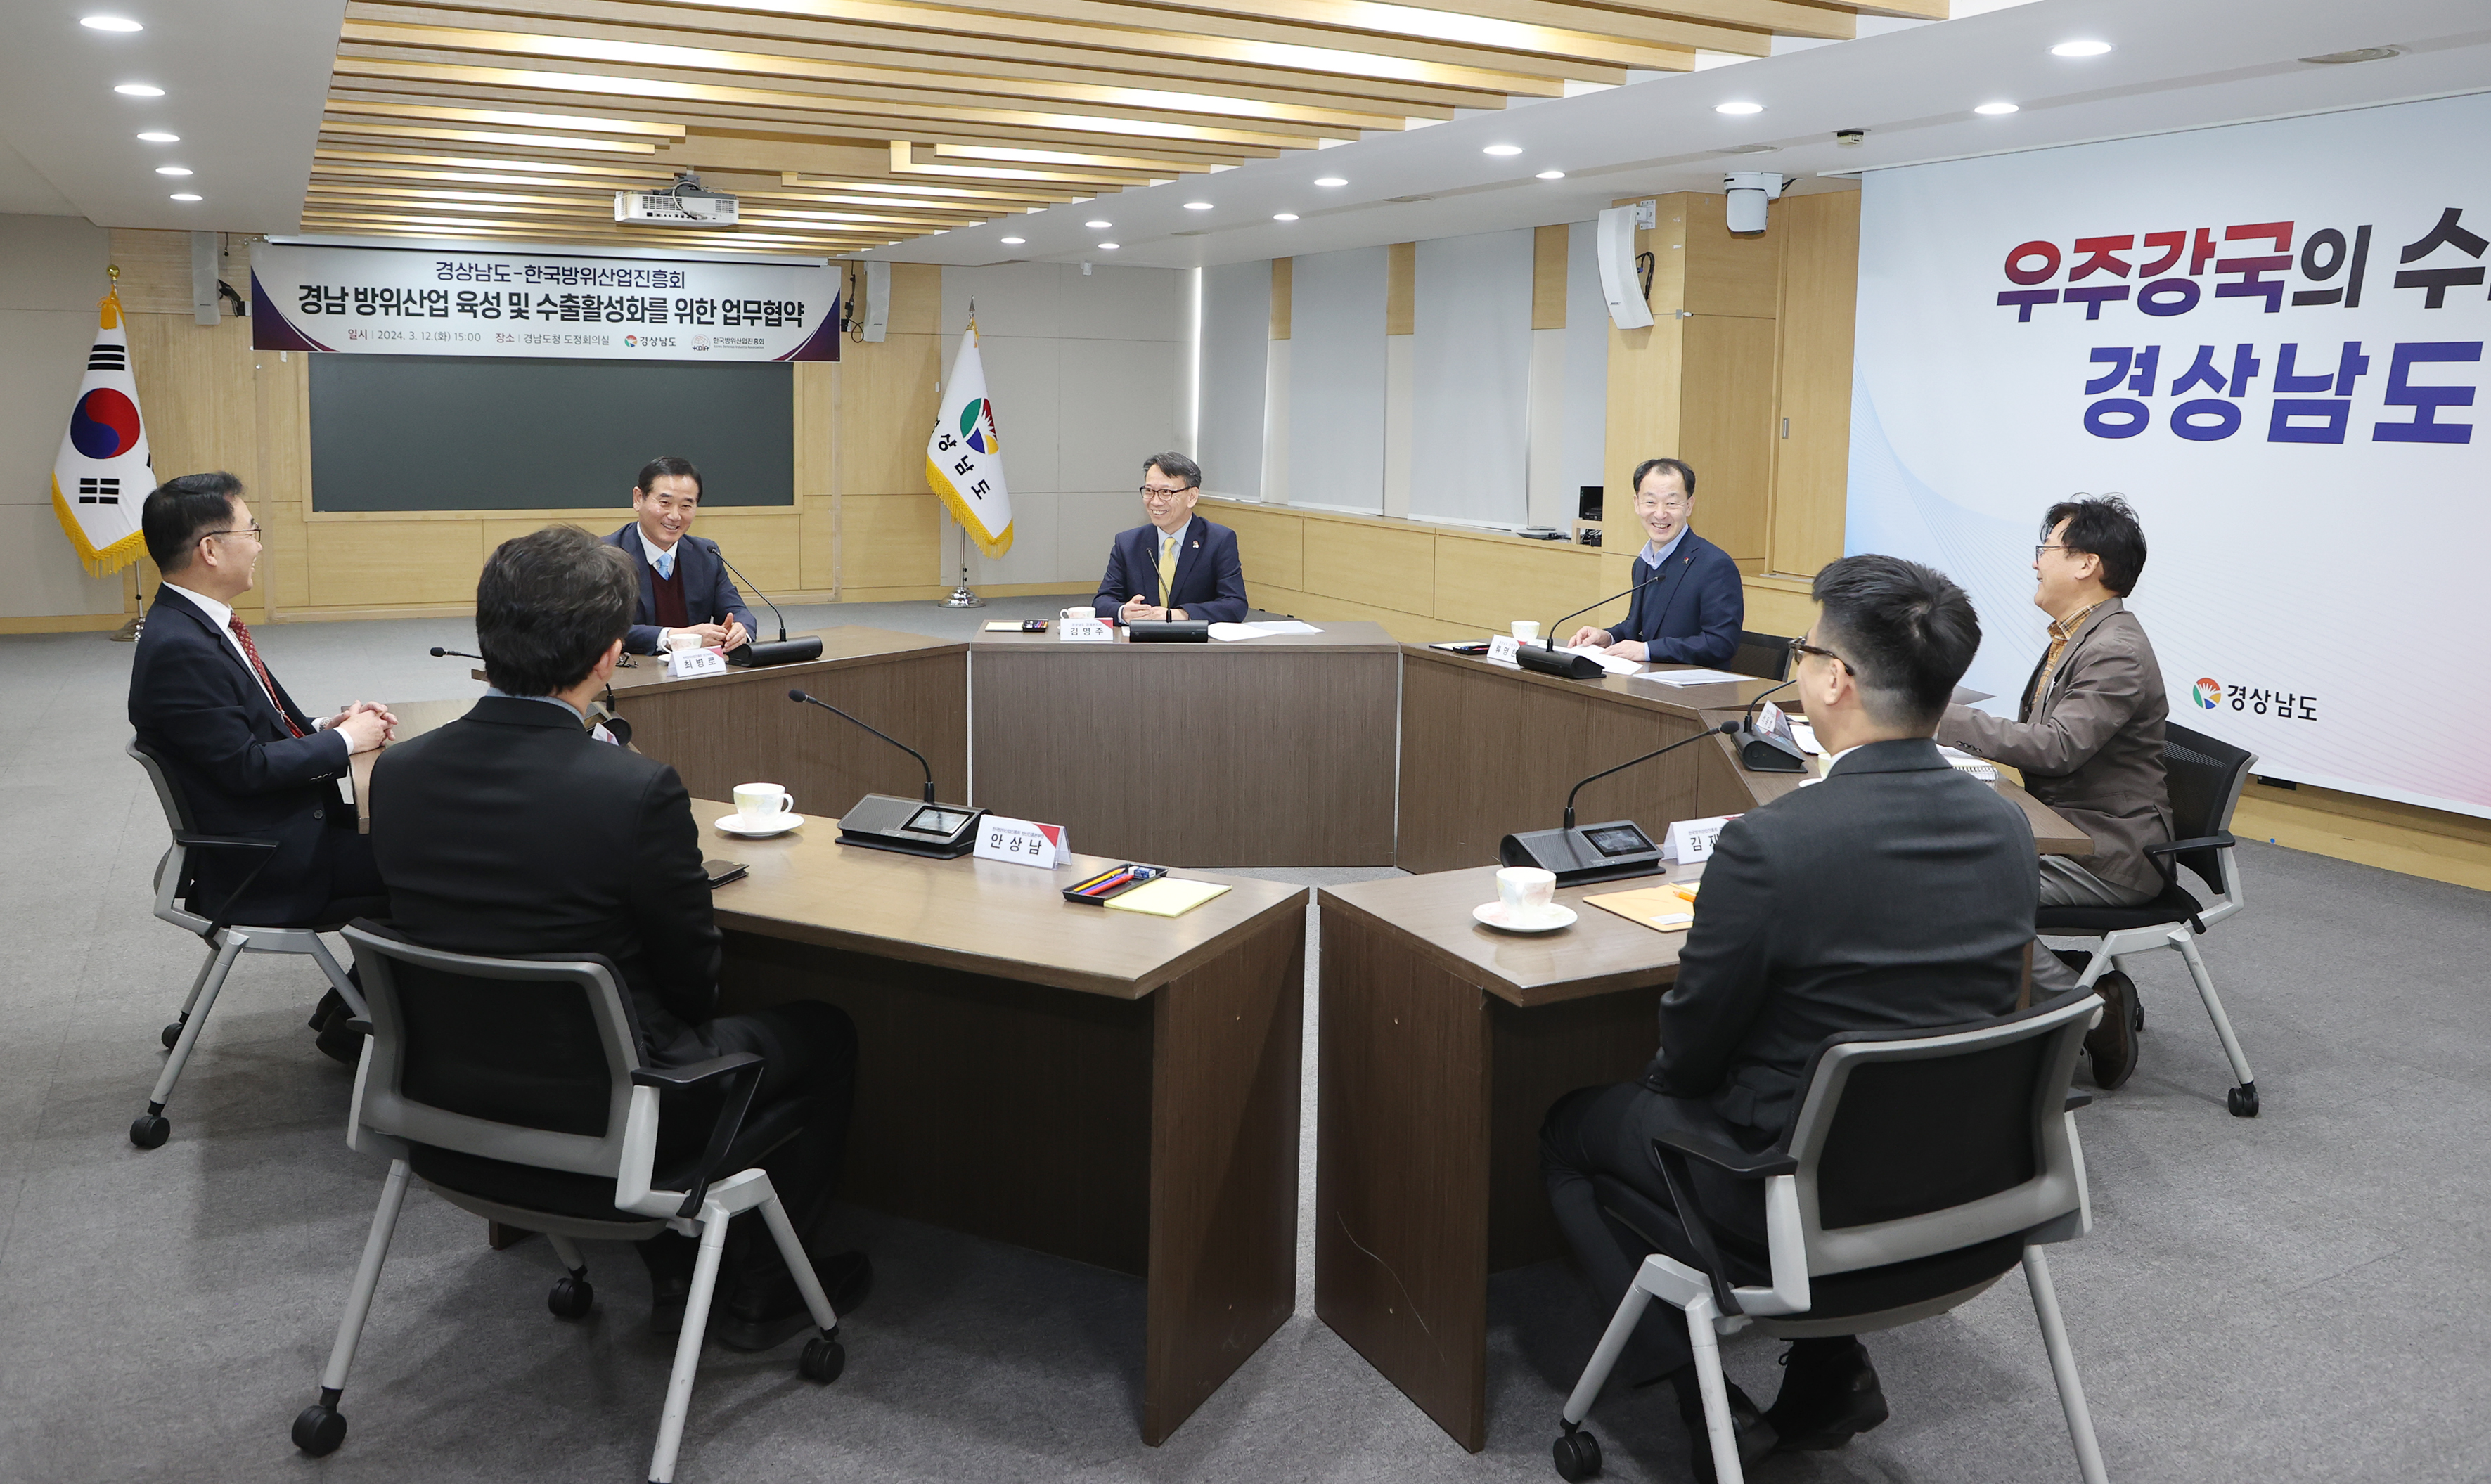 Gyeongsangnam-do and KDIA Sign MoU for the Promotion and Export Expansion of Gyeongsangnam-dos Defense Industry의 파일 이미지